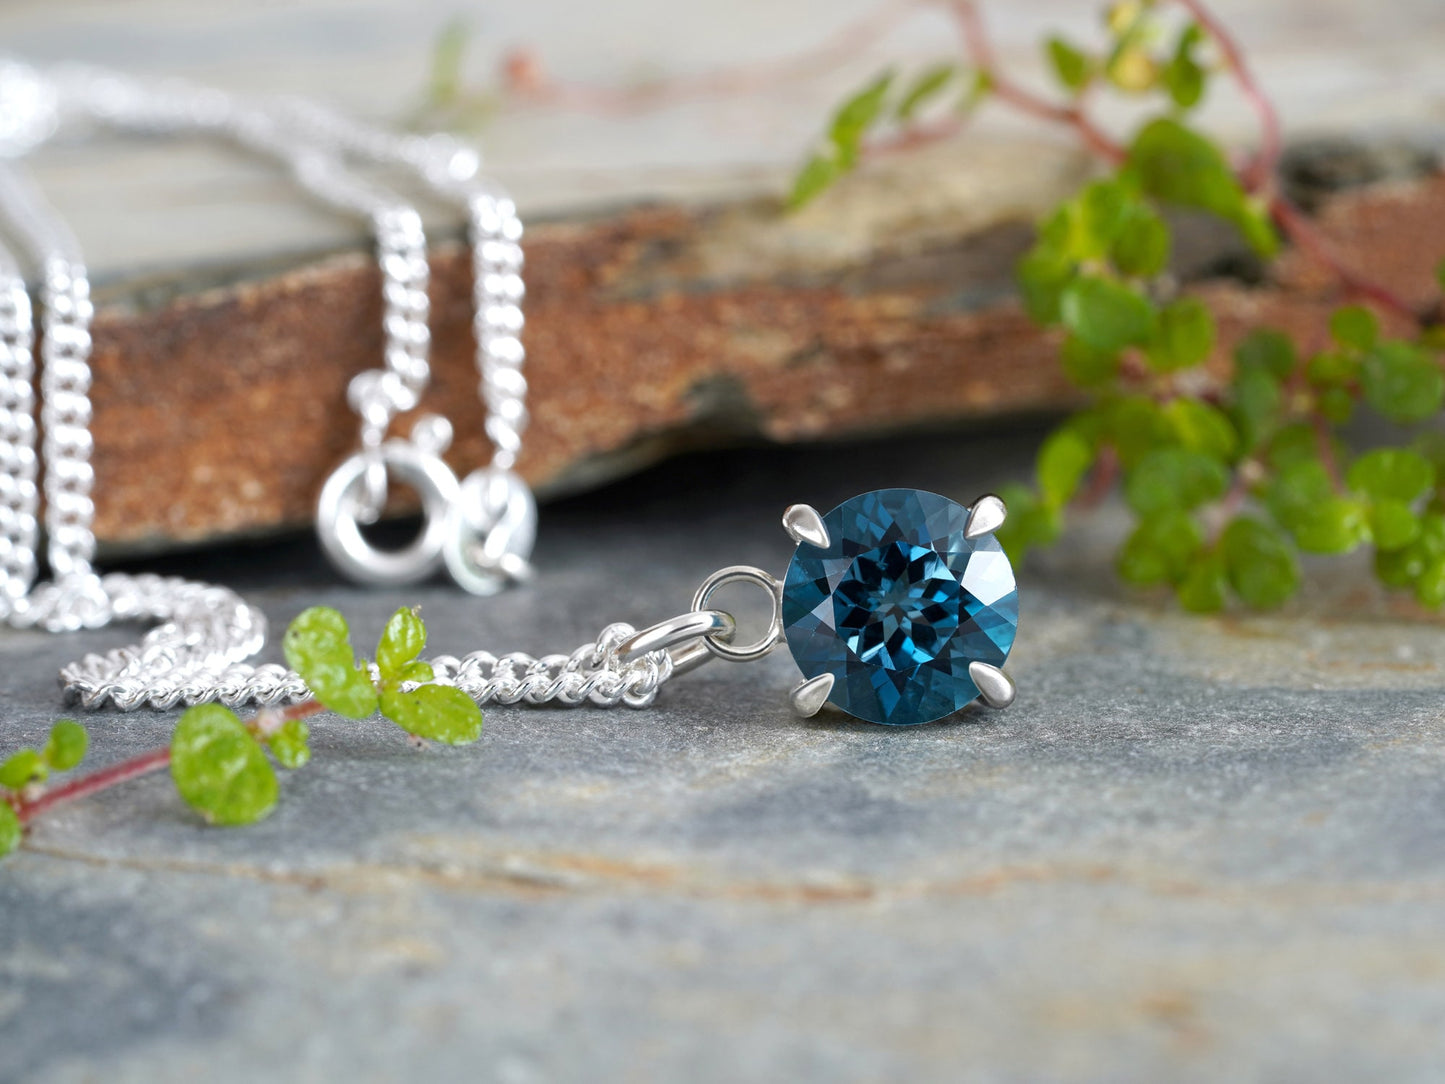 9mm Large Topaz Necklace in Sterling Silver, Prong Set Topaz Necklace